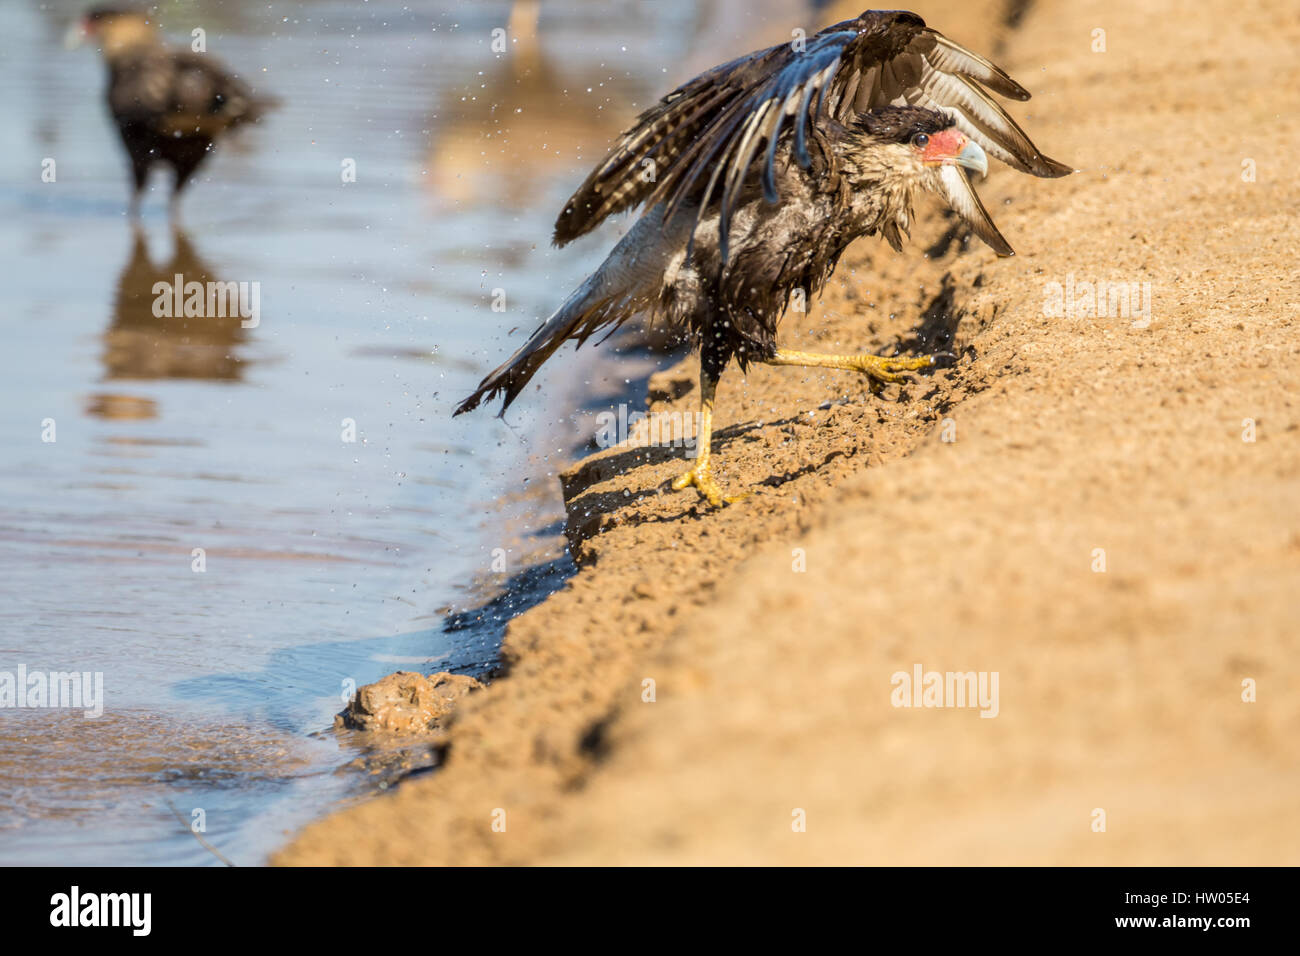 Southern Crested Caracara shaking water off its feathers after taking a bath in the Cuiaba River, looking very grumpy, in the Pantanal region, Mato Gr Stock Photo